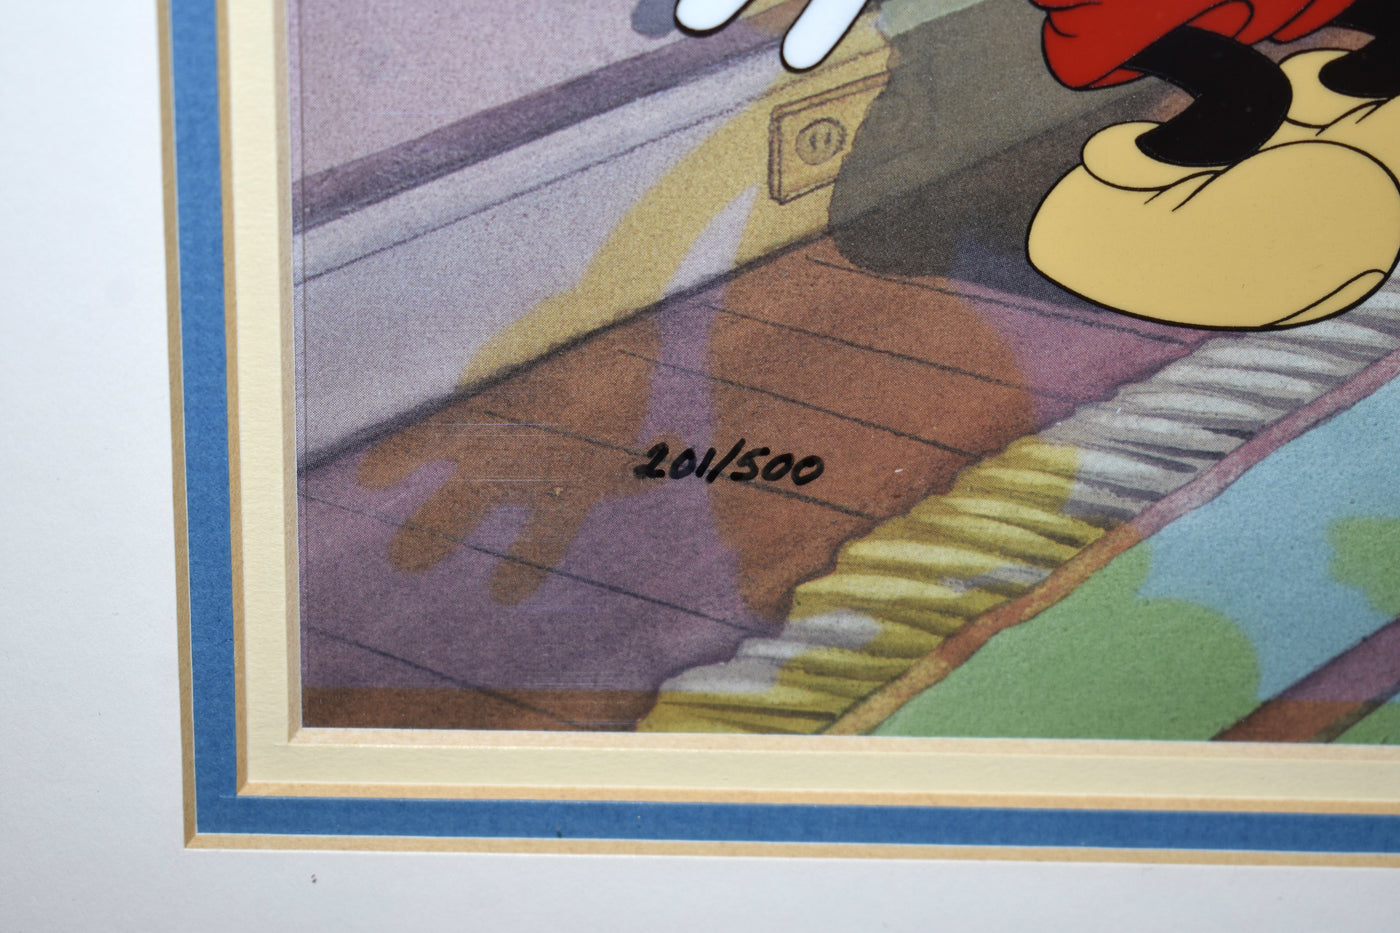 Disney Animation Art Moving Day Limited Edition Cel Featuring Mickey, Pete, and Donald from "Disney Villains Volume I," Signed by Ollie Johnston and Frank Thomas